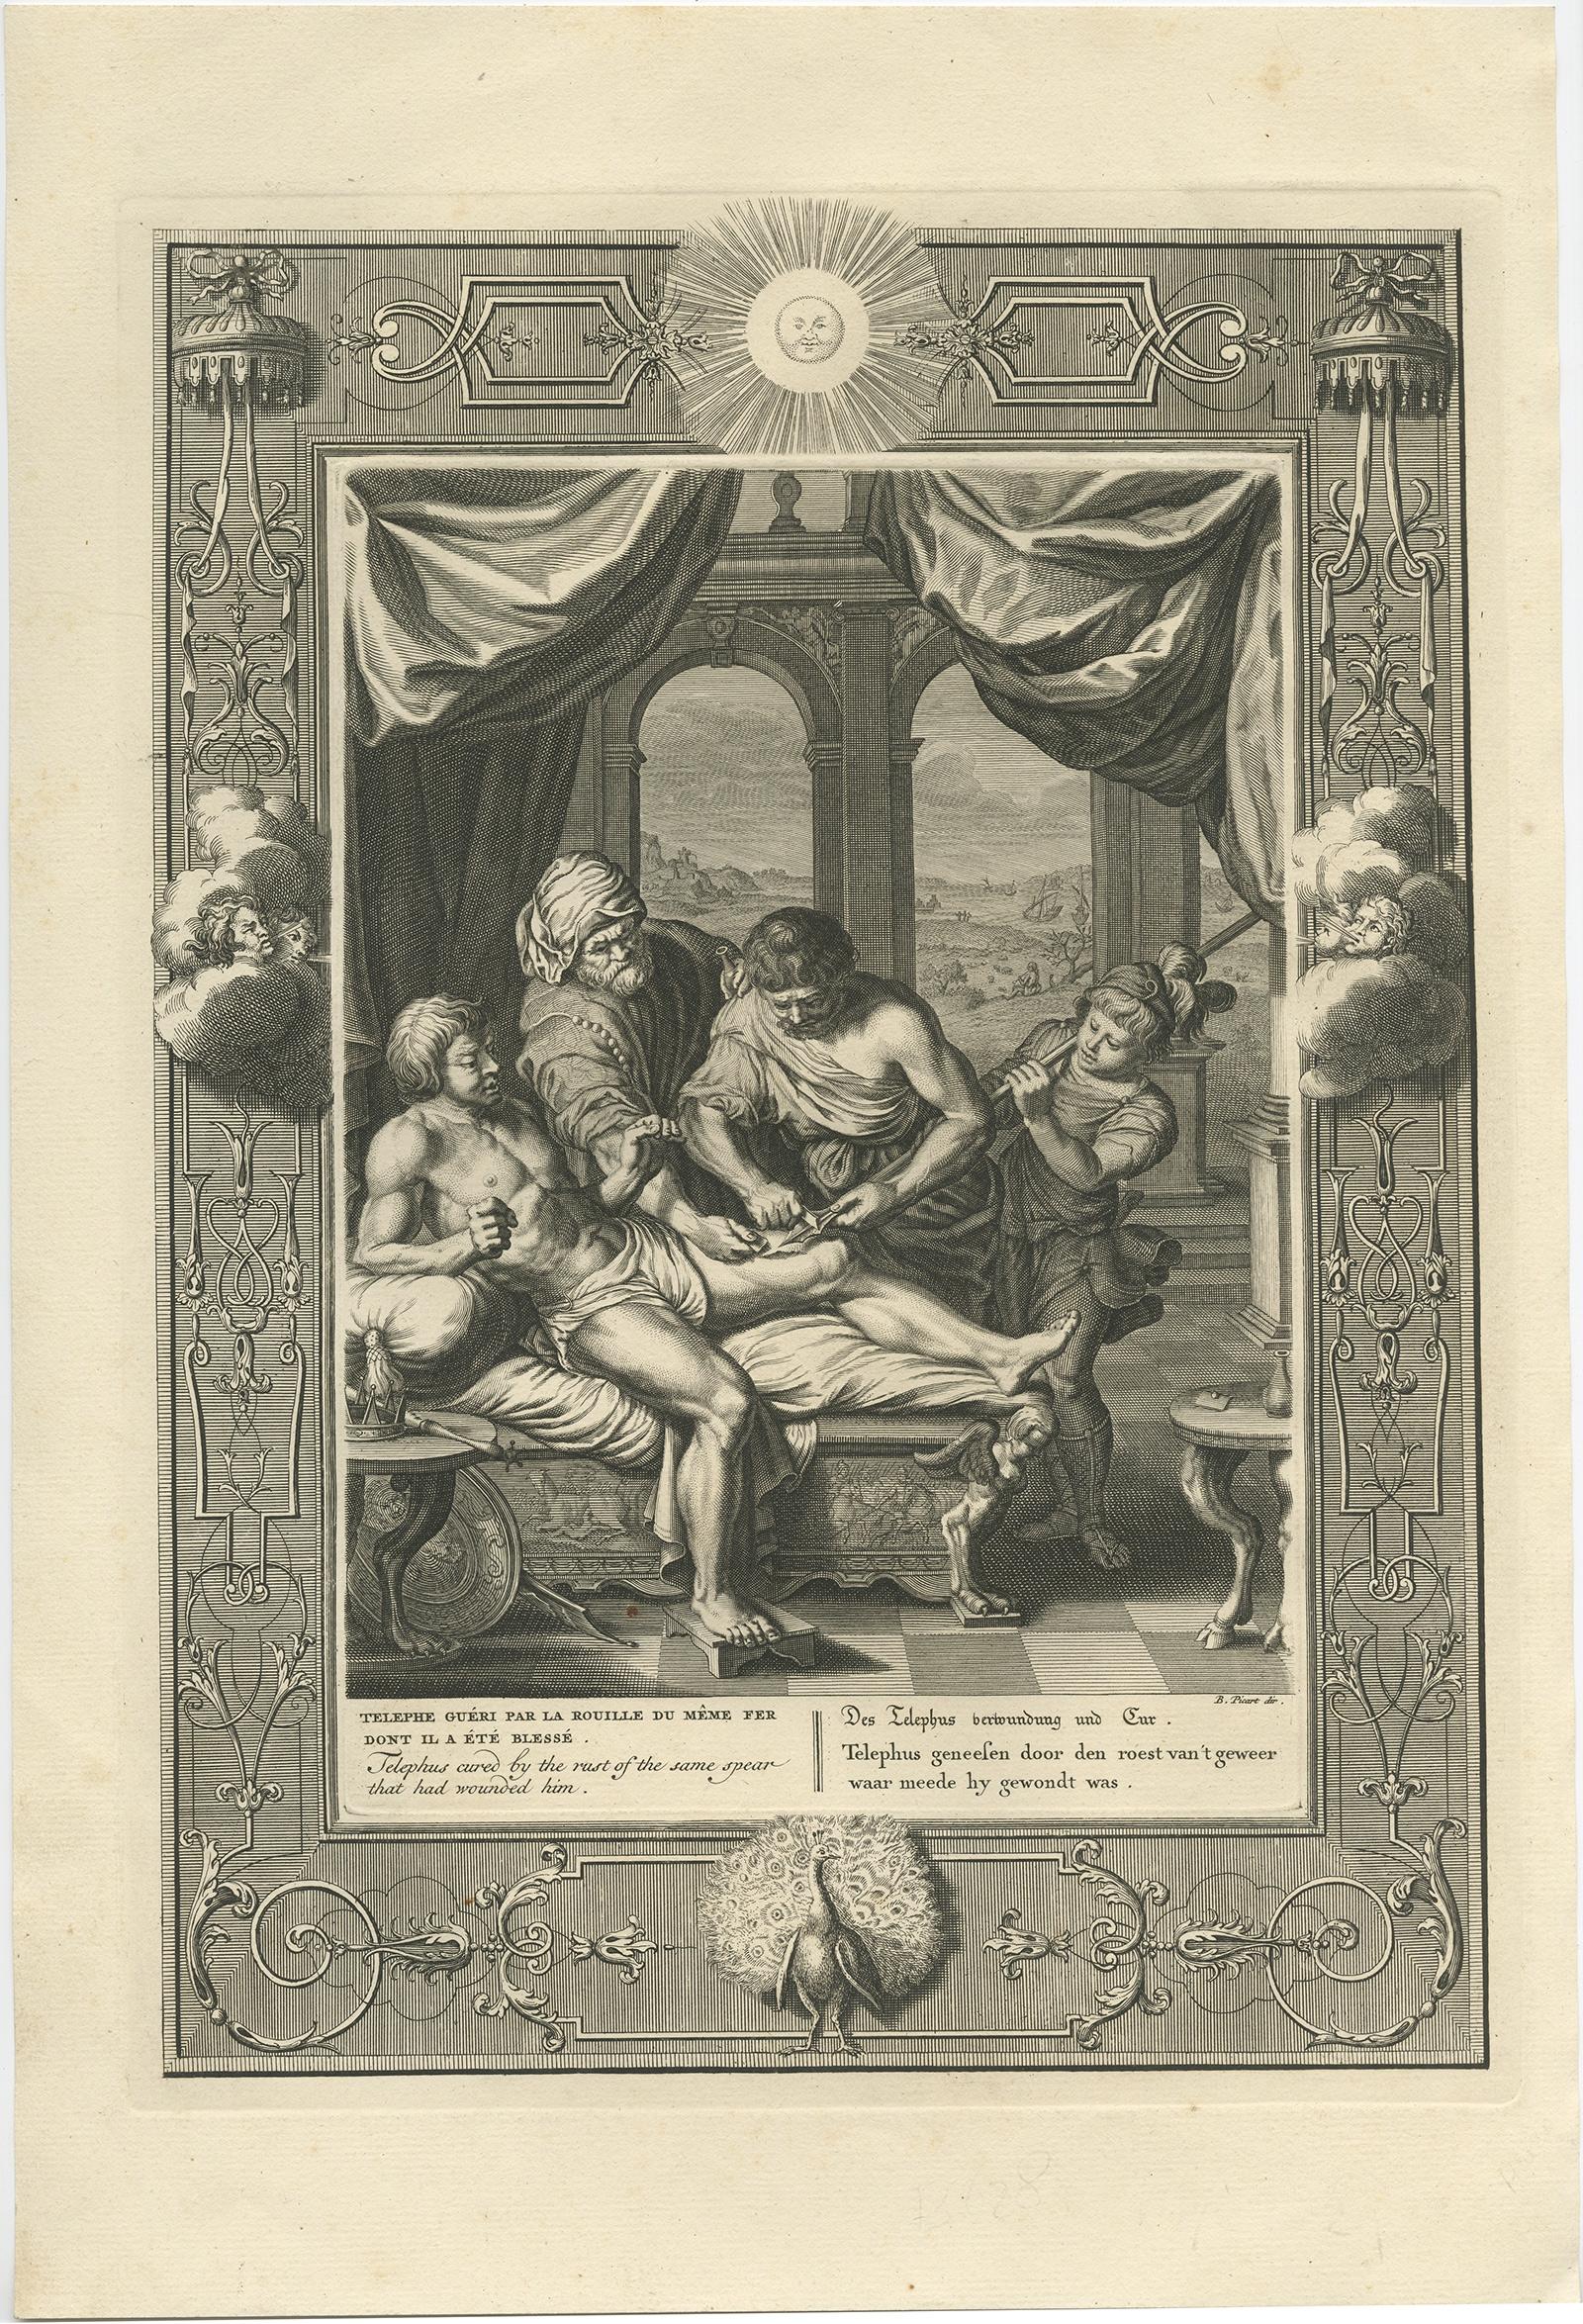 Antique print titled 'Telephe Guéri par la Rouille (..)'. 

This print depicts Telephus cured by the rust of the same spear that had wounded him. Telephos was one of the Heraclidae, the sons of Heracles, who were venerated as founders of cities.